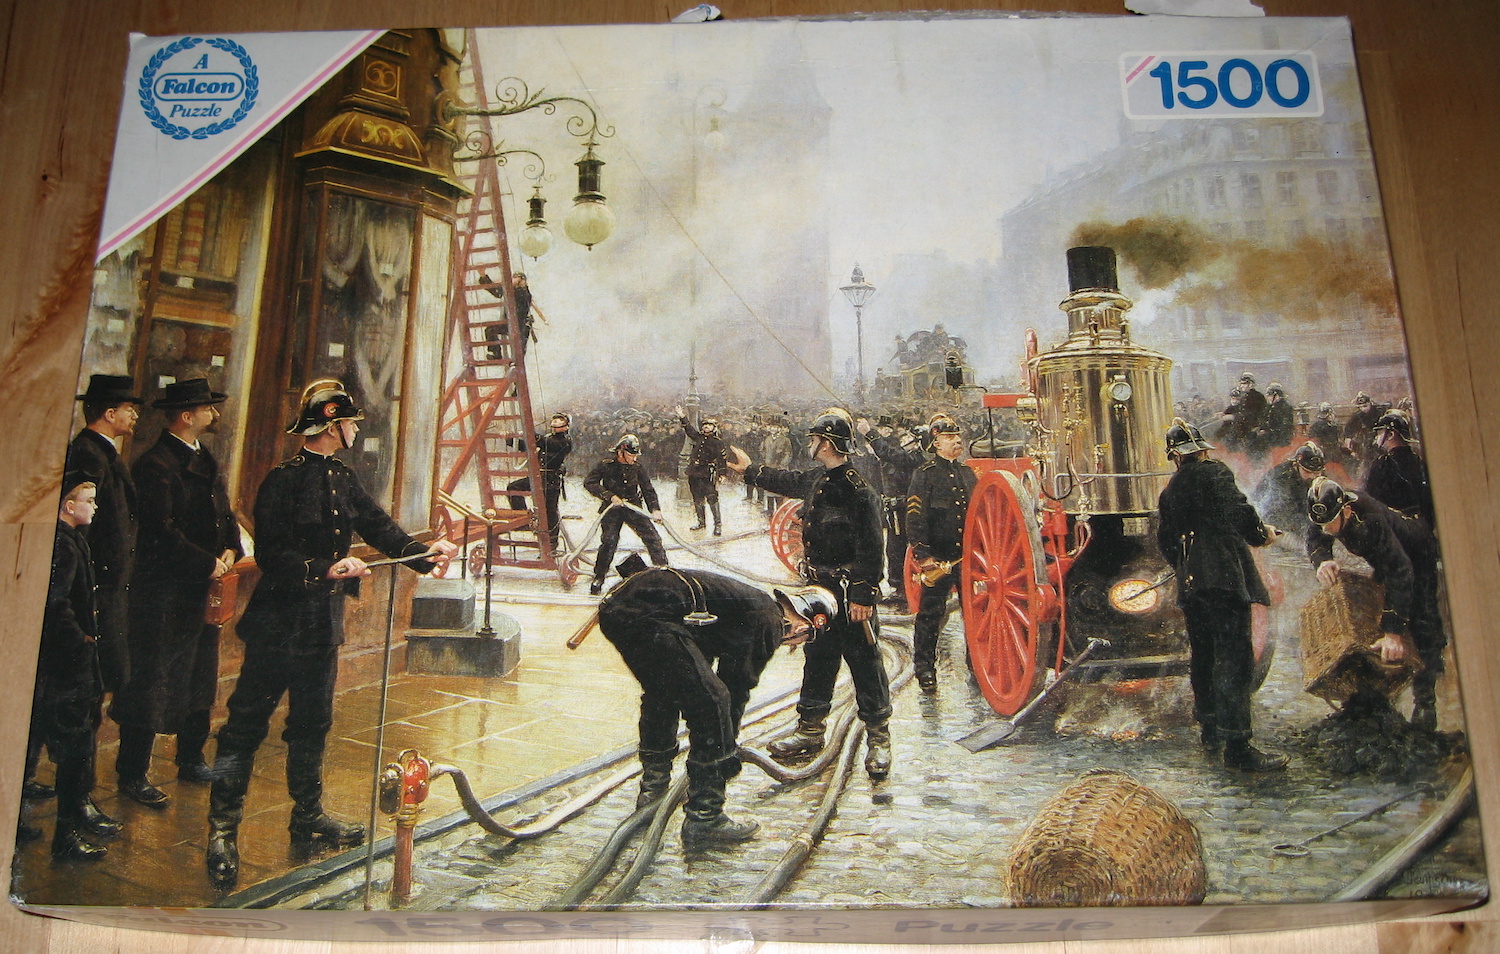 Image of the Puzzle 1500, Falcon, The Fire Brigade Turn Out in Kultorvet, Copenhagen, Picture of the Box